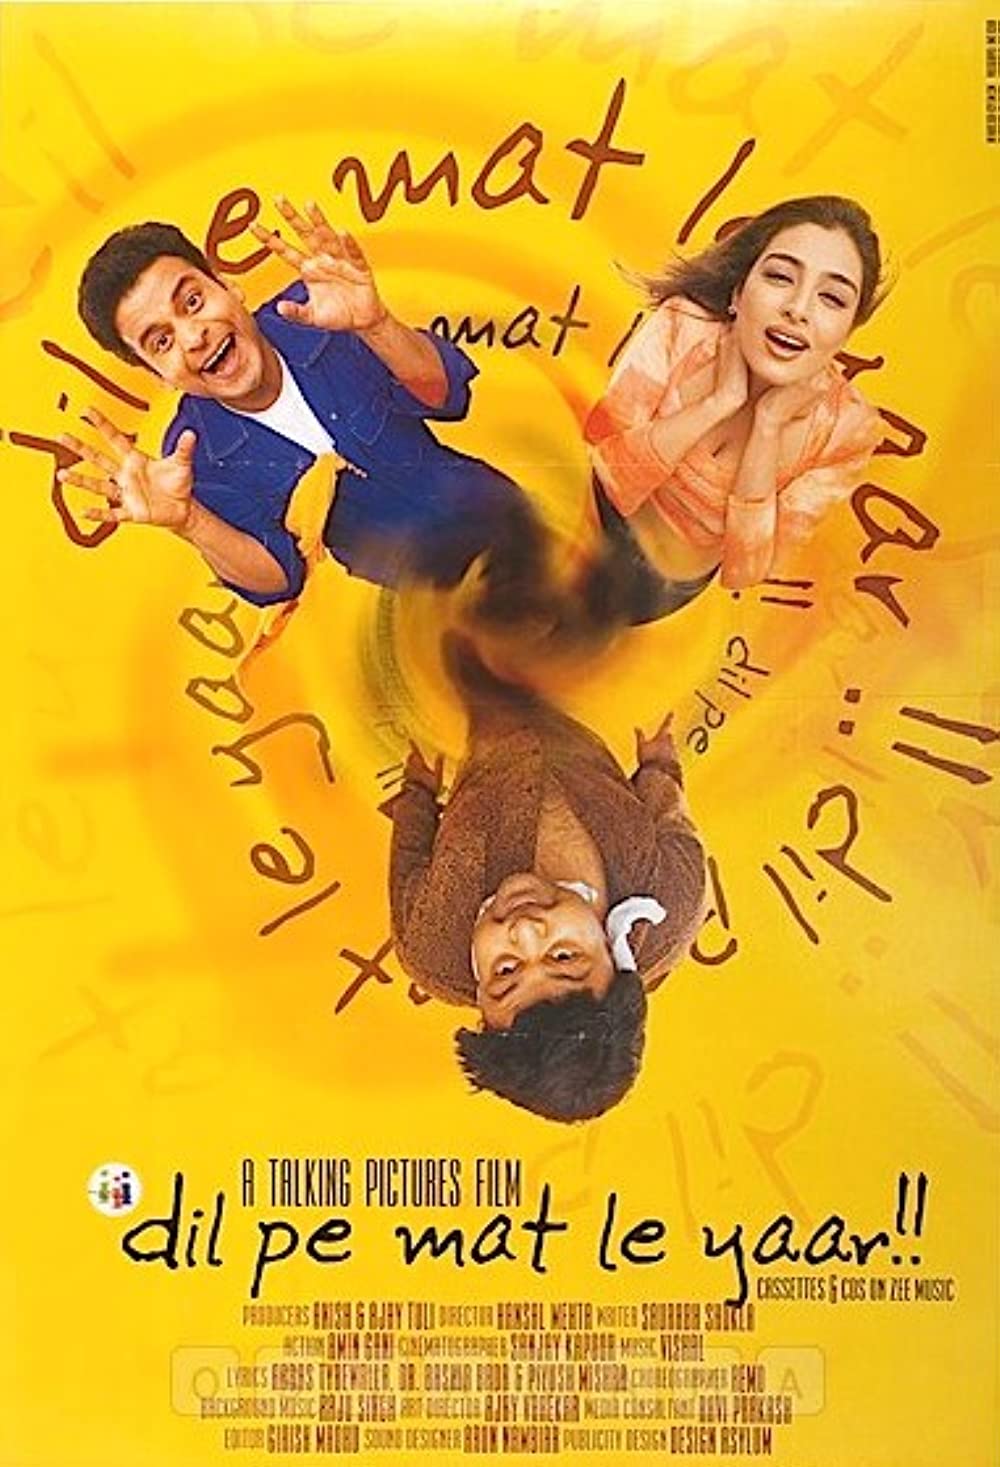 Film and web series directed by Hansal Mehta